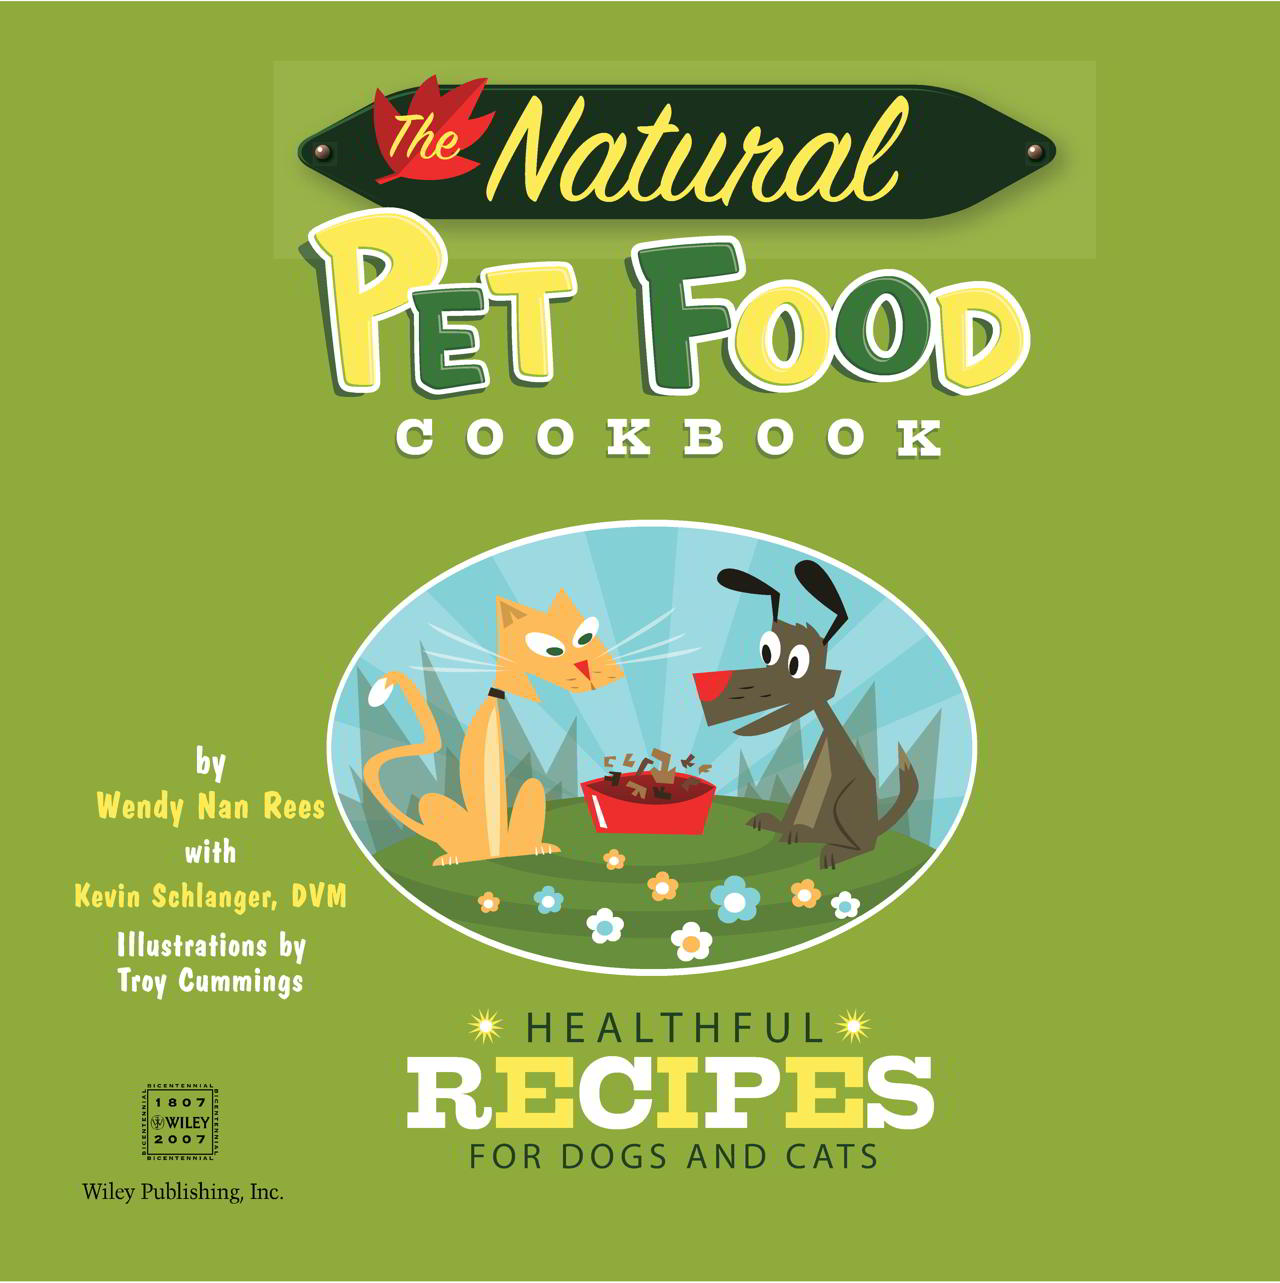 the-natural-pet-food-cookbook-healthful-recipes-for-dogs-and-cats.jpg